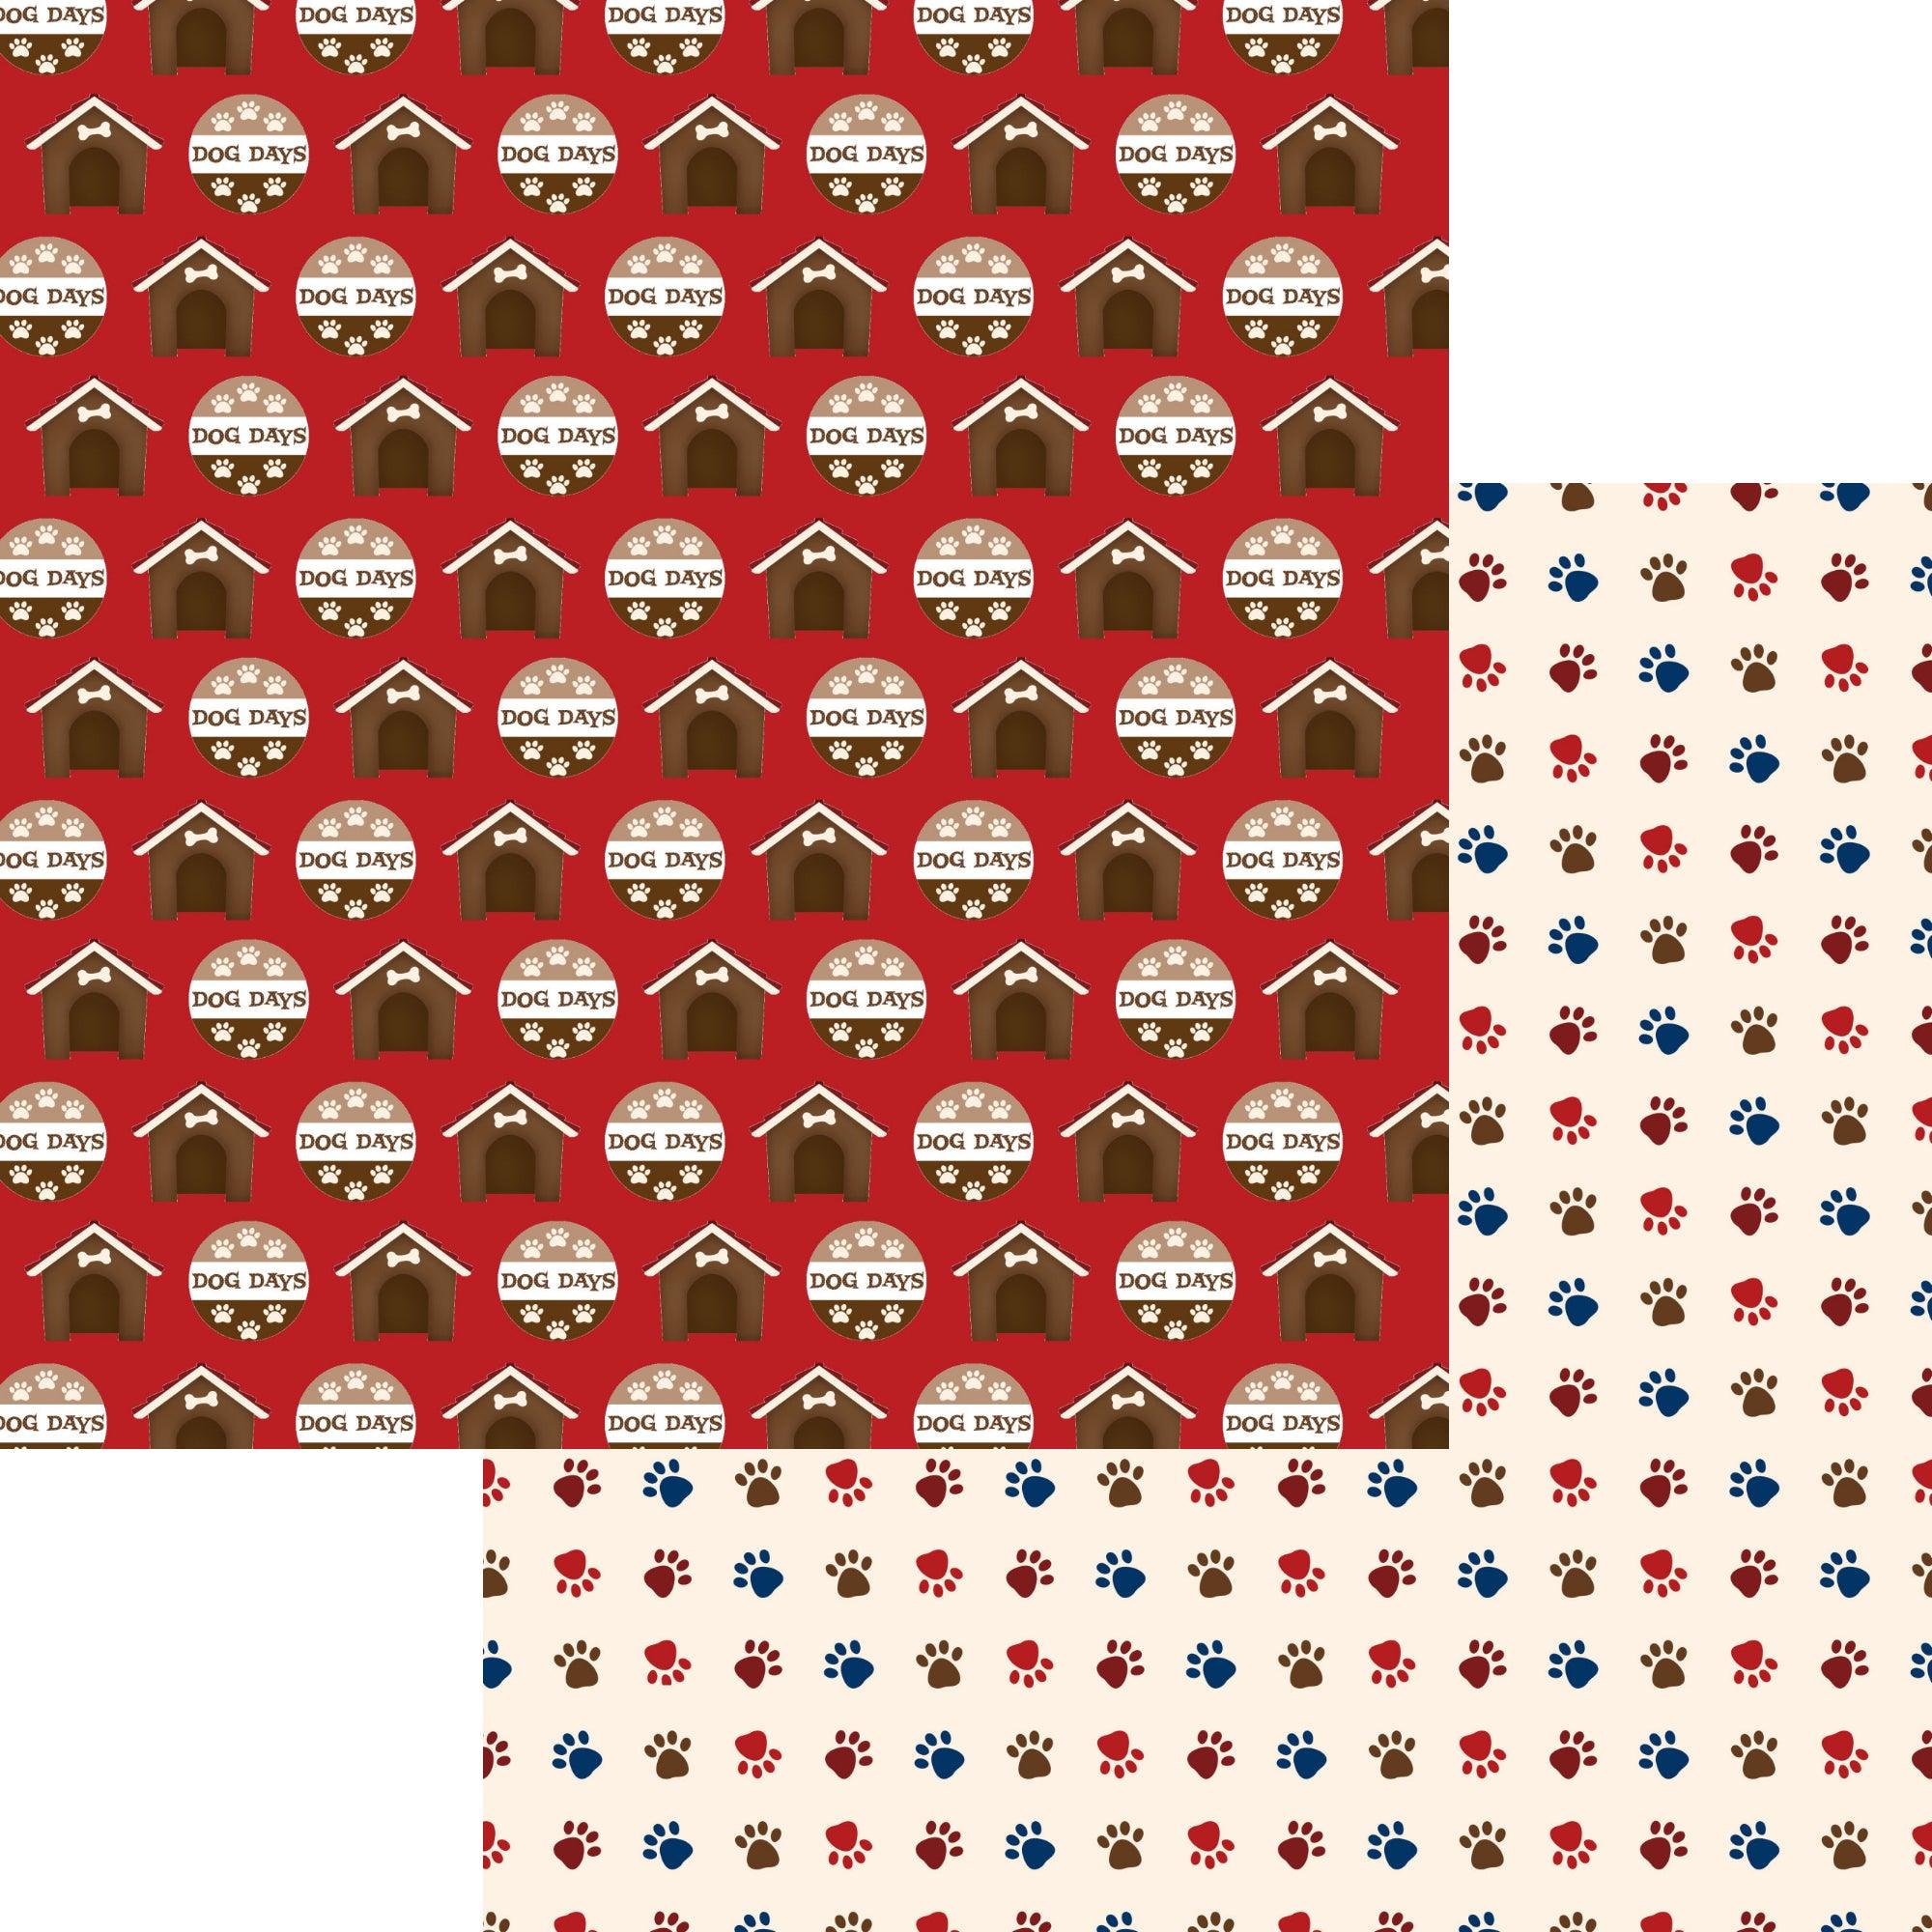 Dog Days Collection Dog Days 12 x 12 Double-Sided Scrapbook Paper by SSC Designs